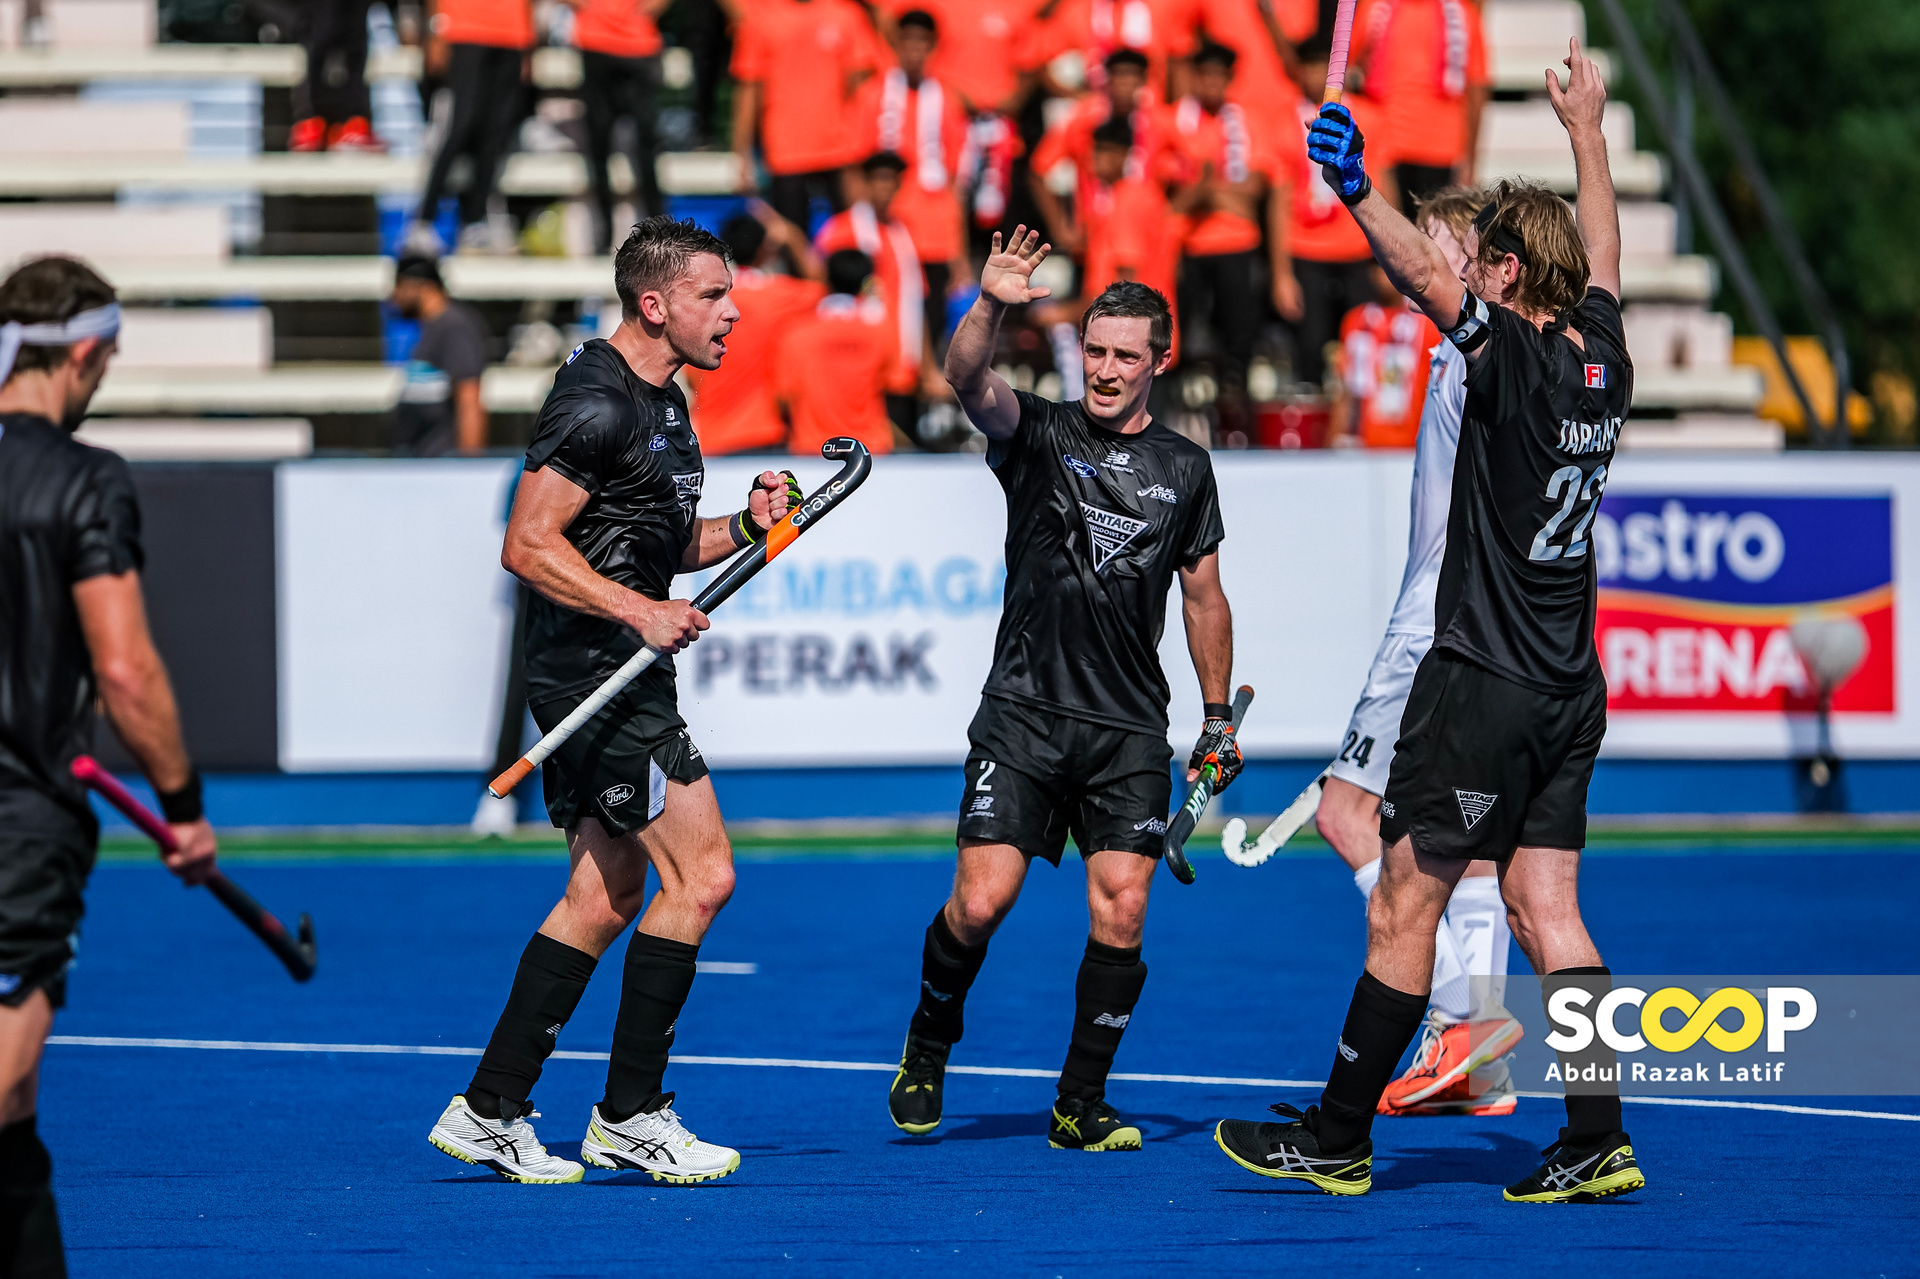 Black Sticks’s emphatic 7-1 triumph leaves coach Nicol wanting more